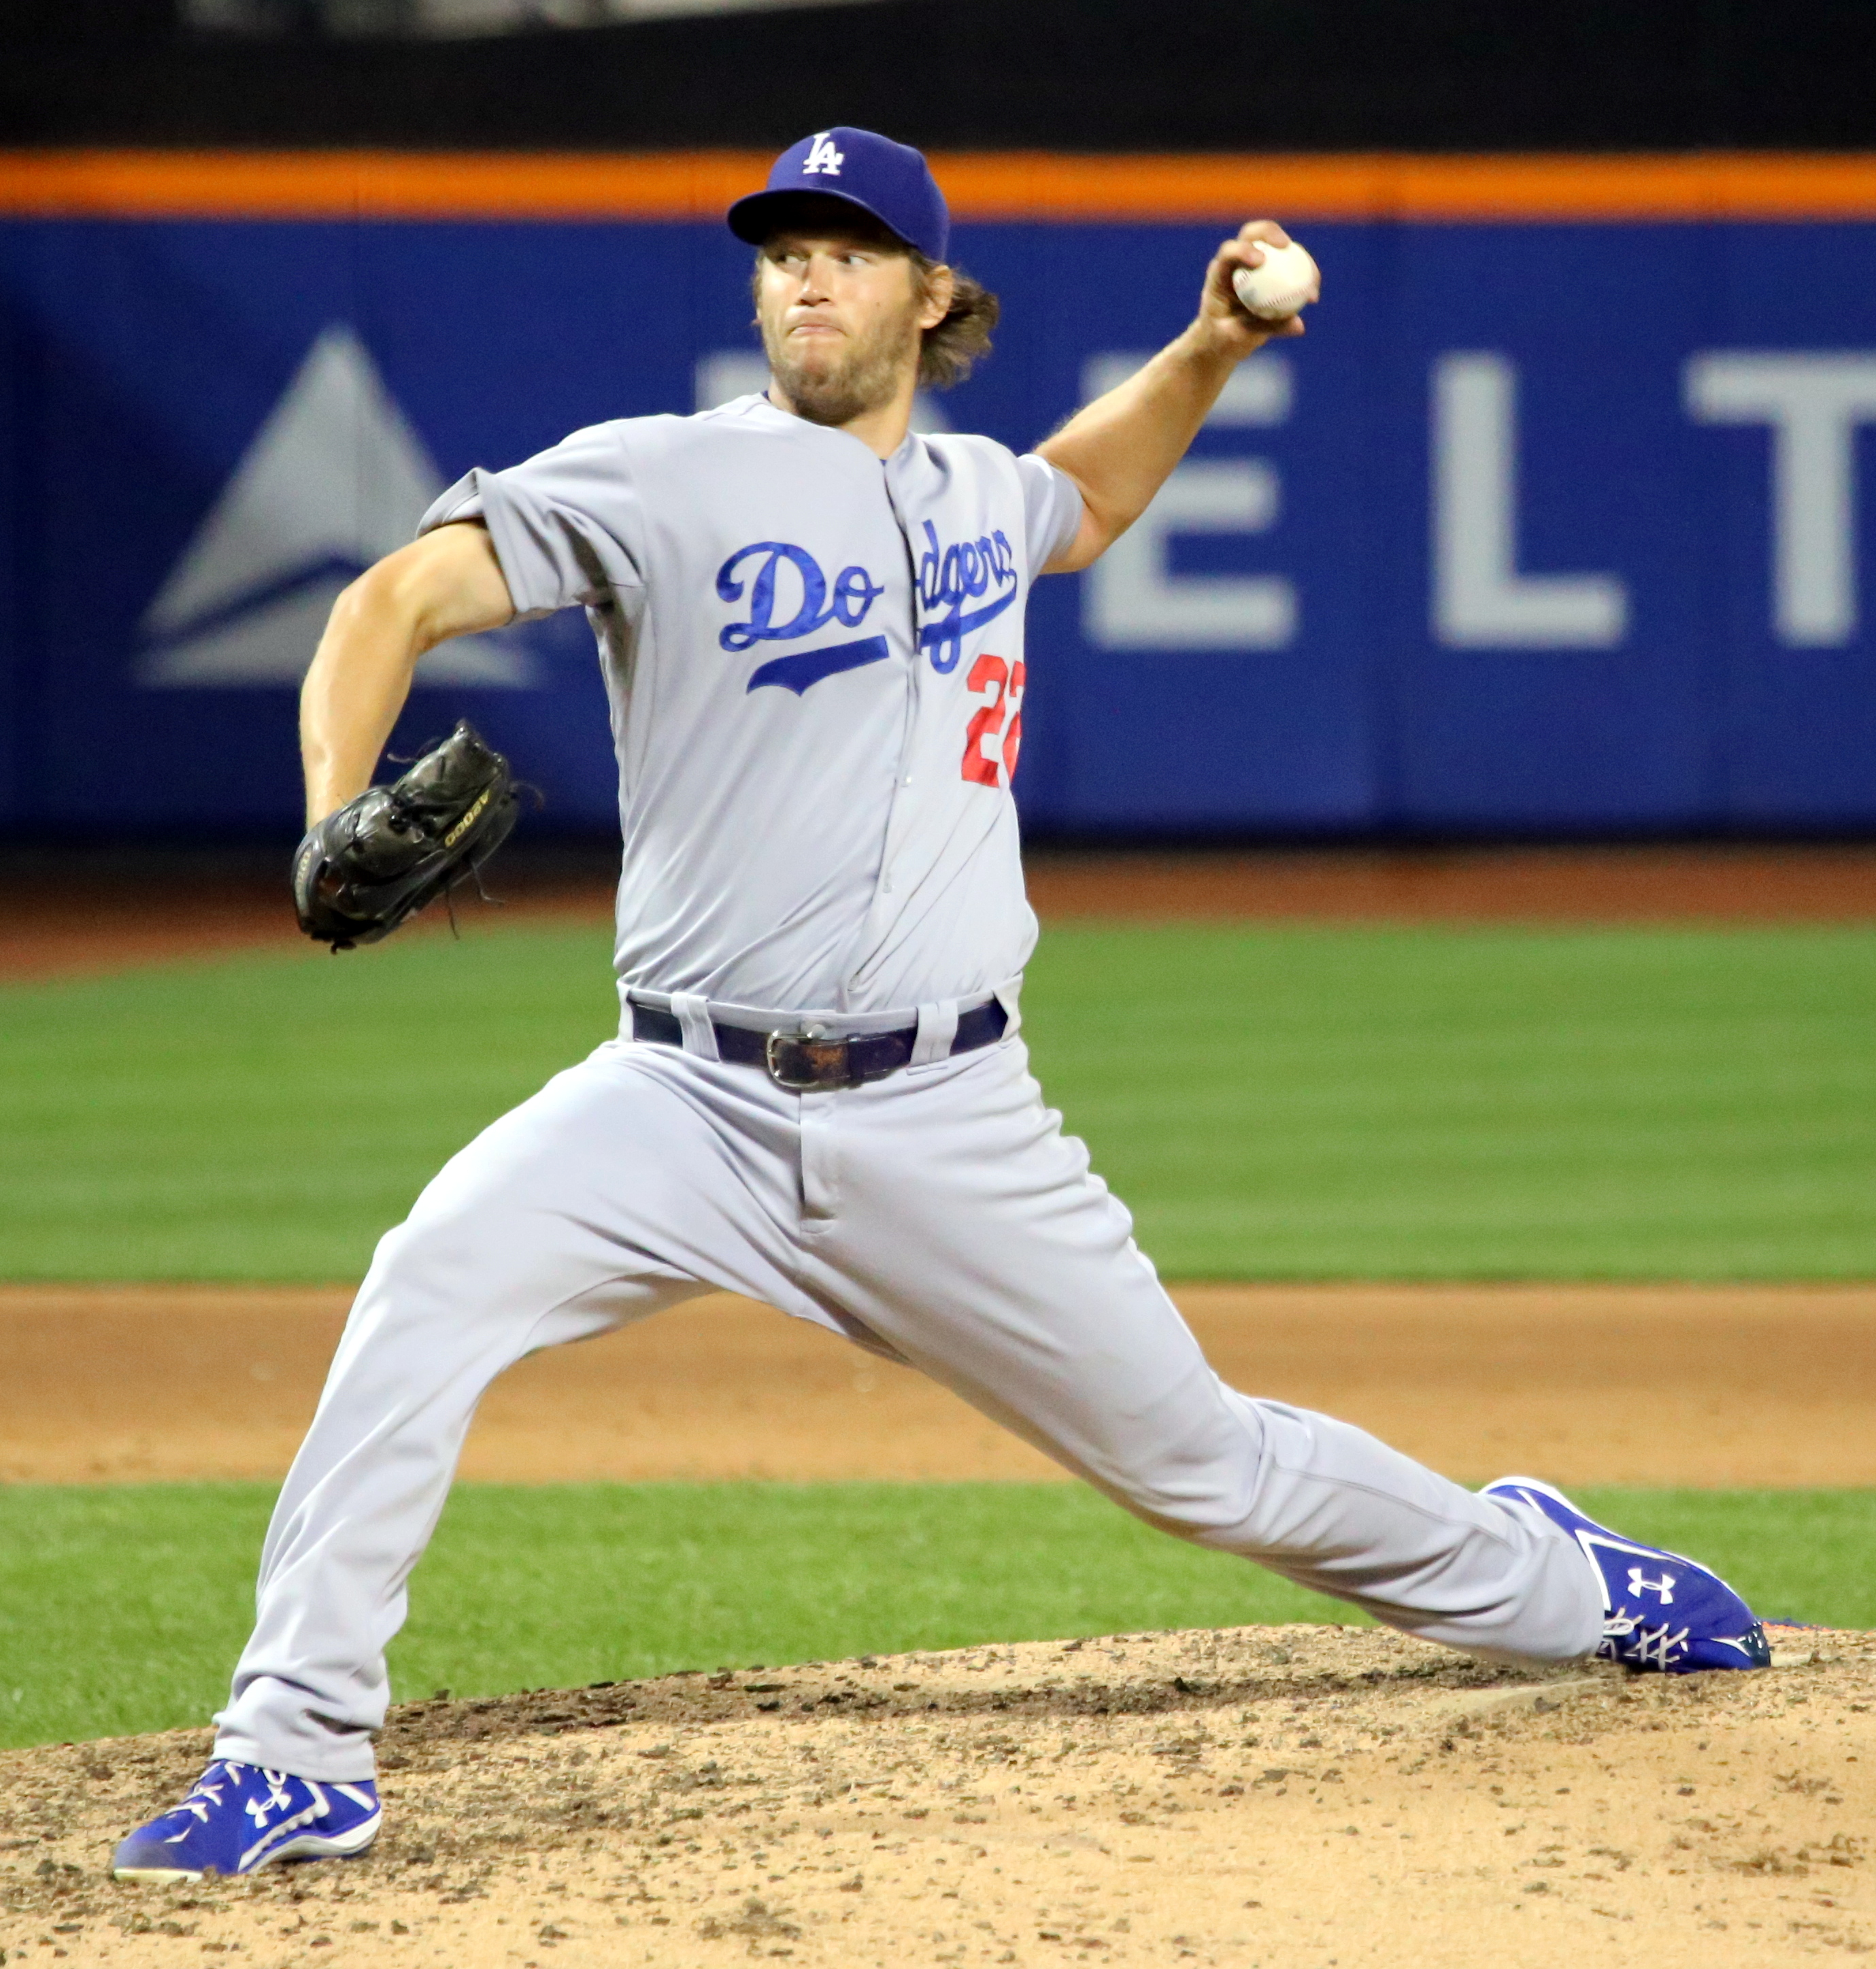 Clayton Kershaw Trading Cards: Values, Tracking & Hot Deals